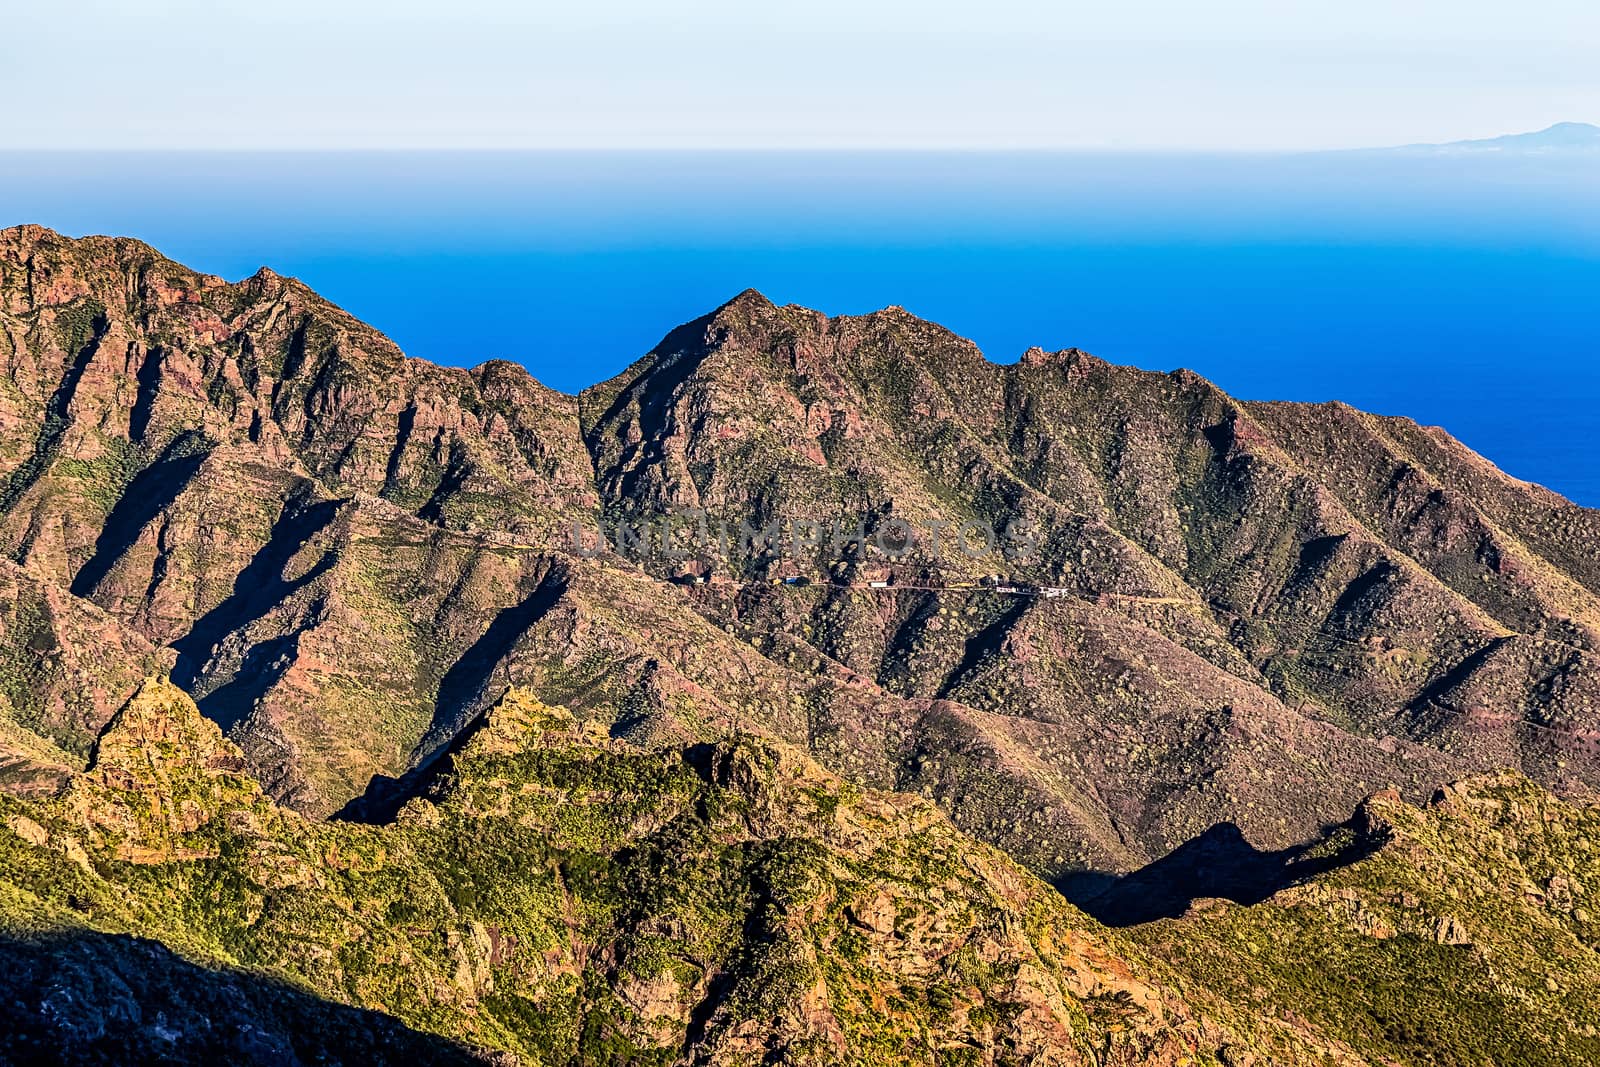 Coast or shore of Atlantic ocean with  mountain or rock and  sky with horizon in Tenerife Canary island, Spain at spring or summer